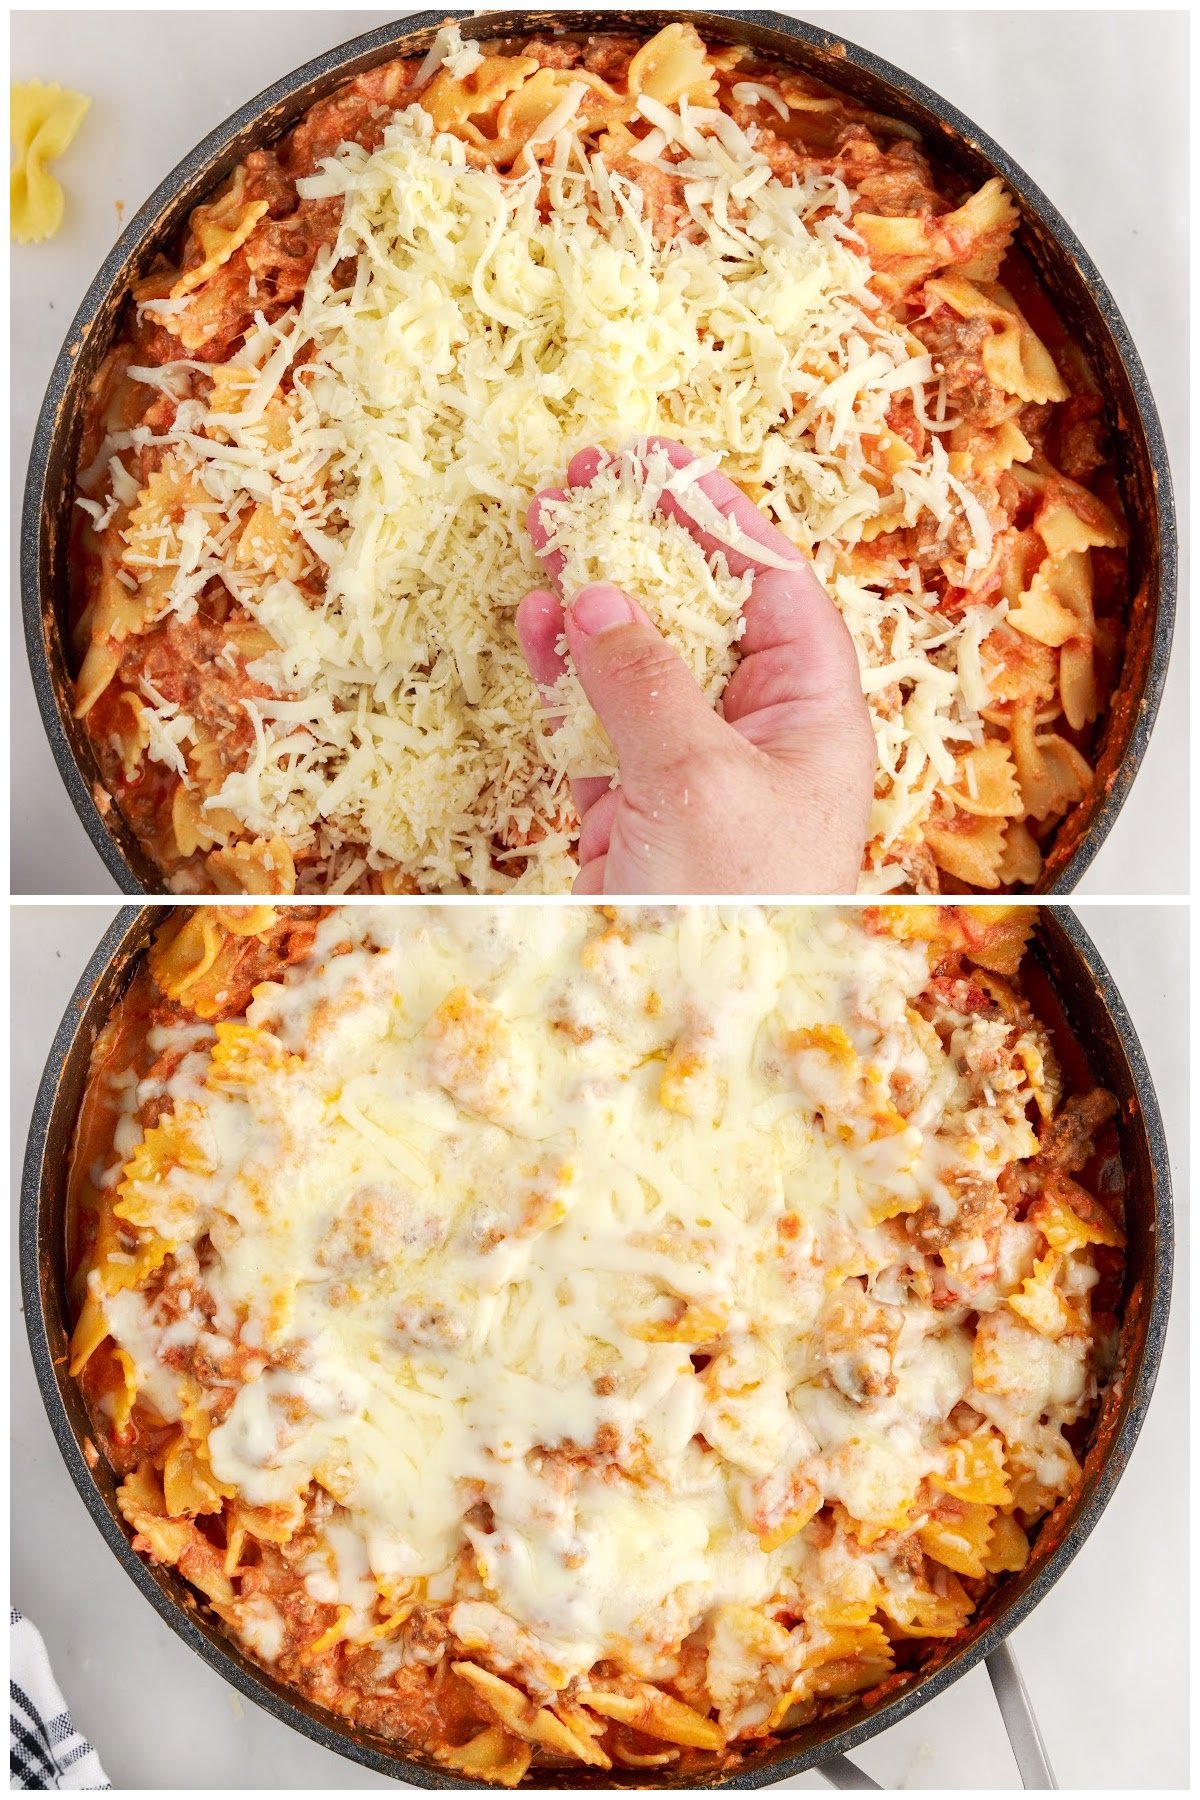 Two images of Bow Tie Lasagna with cheese being added and Bow Tie Lasagna with cheese melted on top.